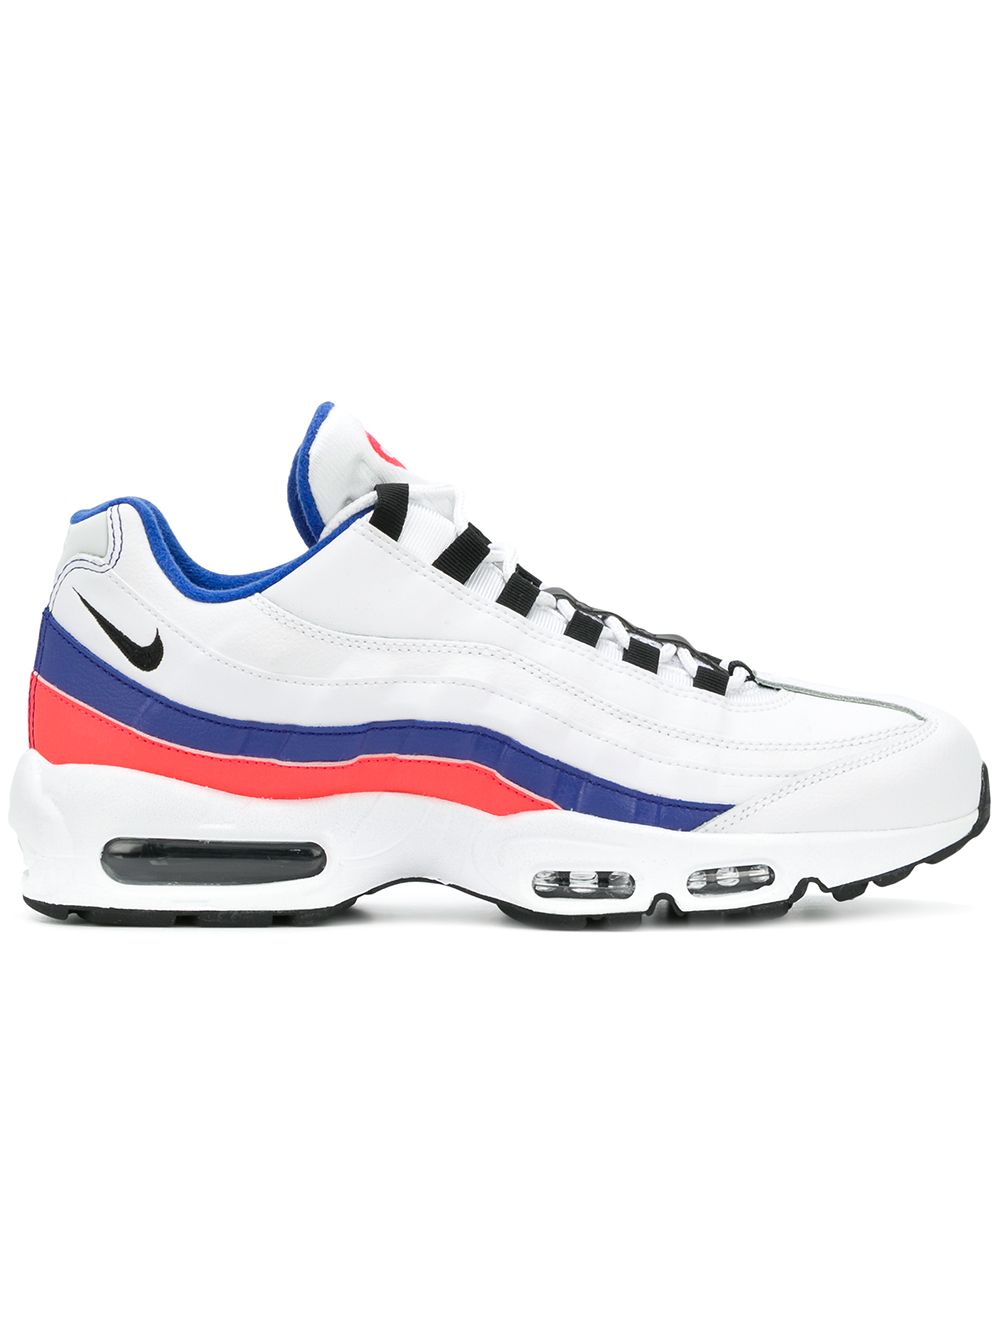 Nike - Air Max 95 Essential sneakers - unisex - Polyamide/Rubber/Leather - 8.5 - White